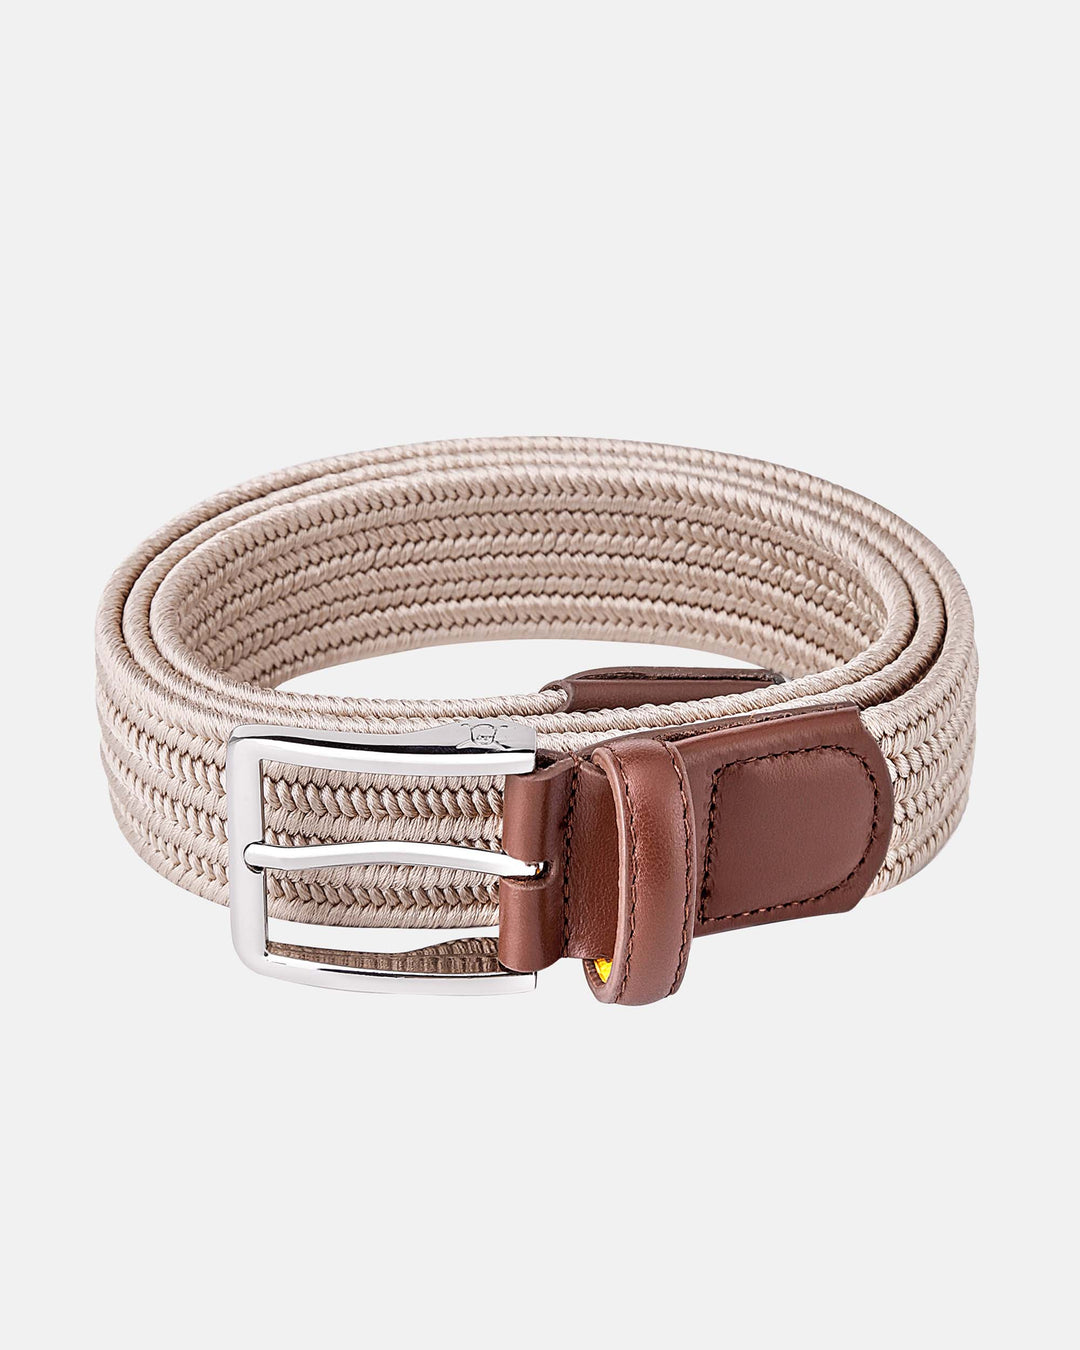 Ghost Golf Sam Belt Khaki Belt with Silver Buckle and Tan Brown Leather Tail